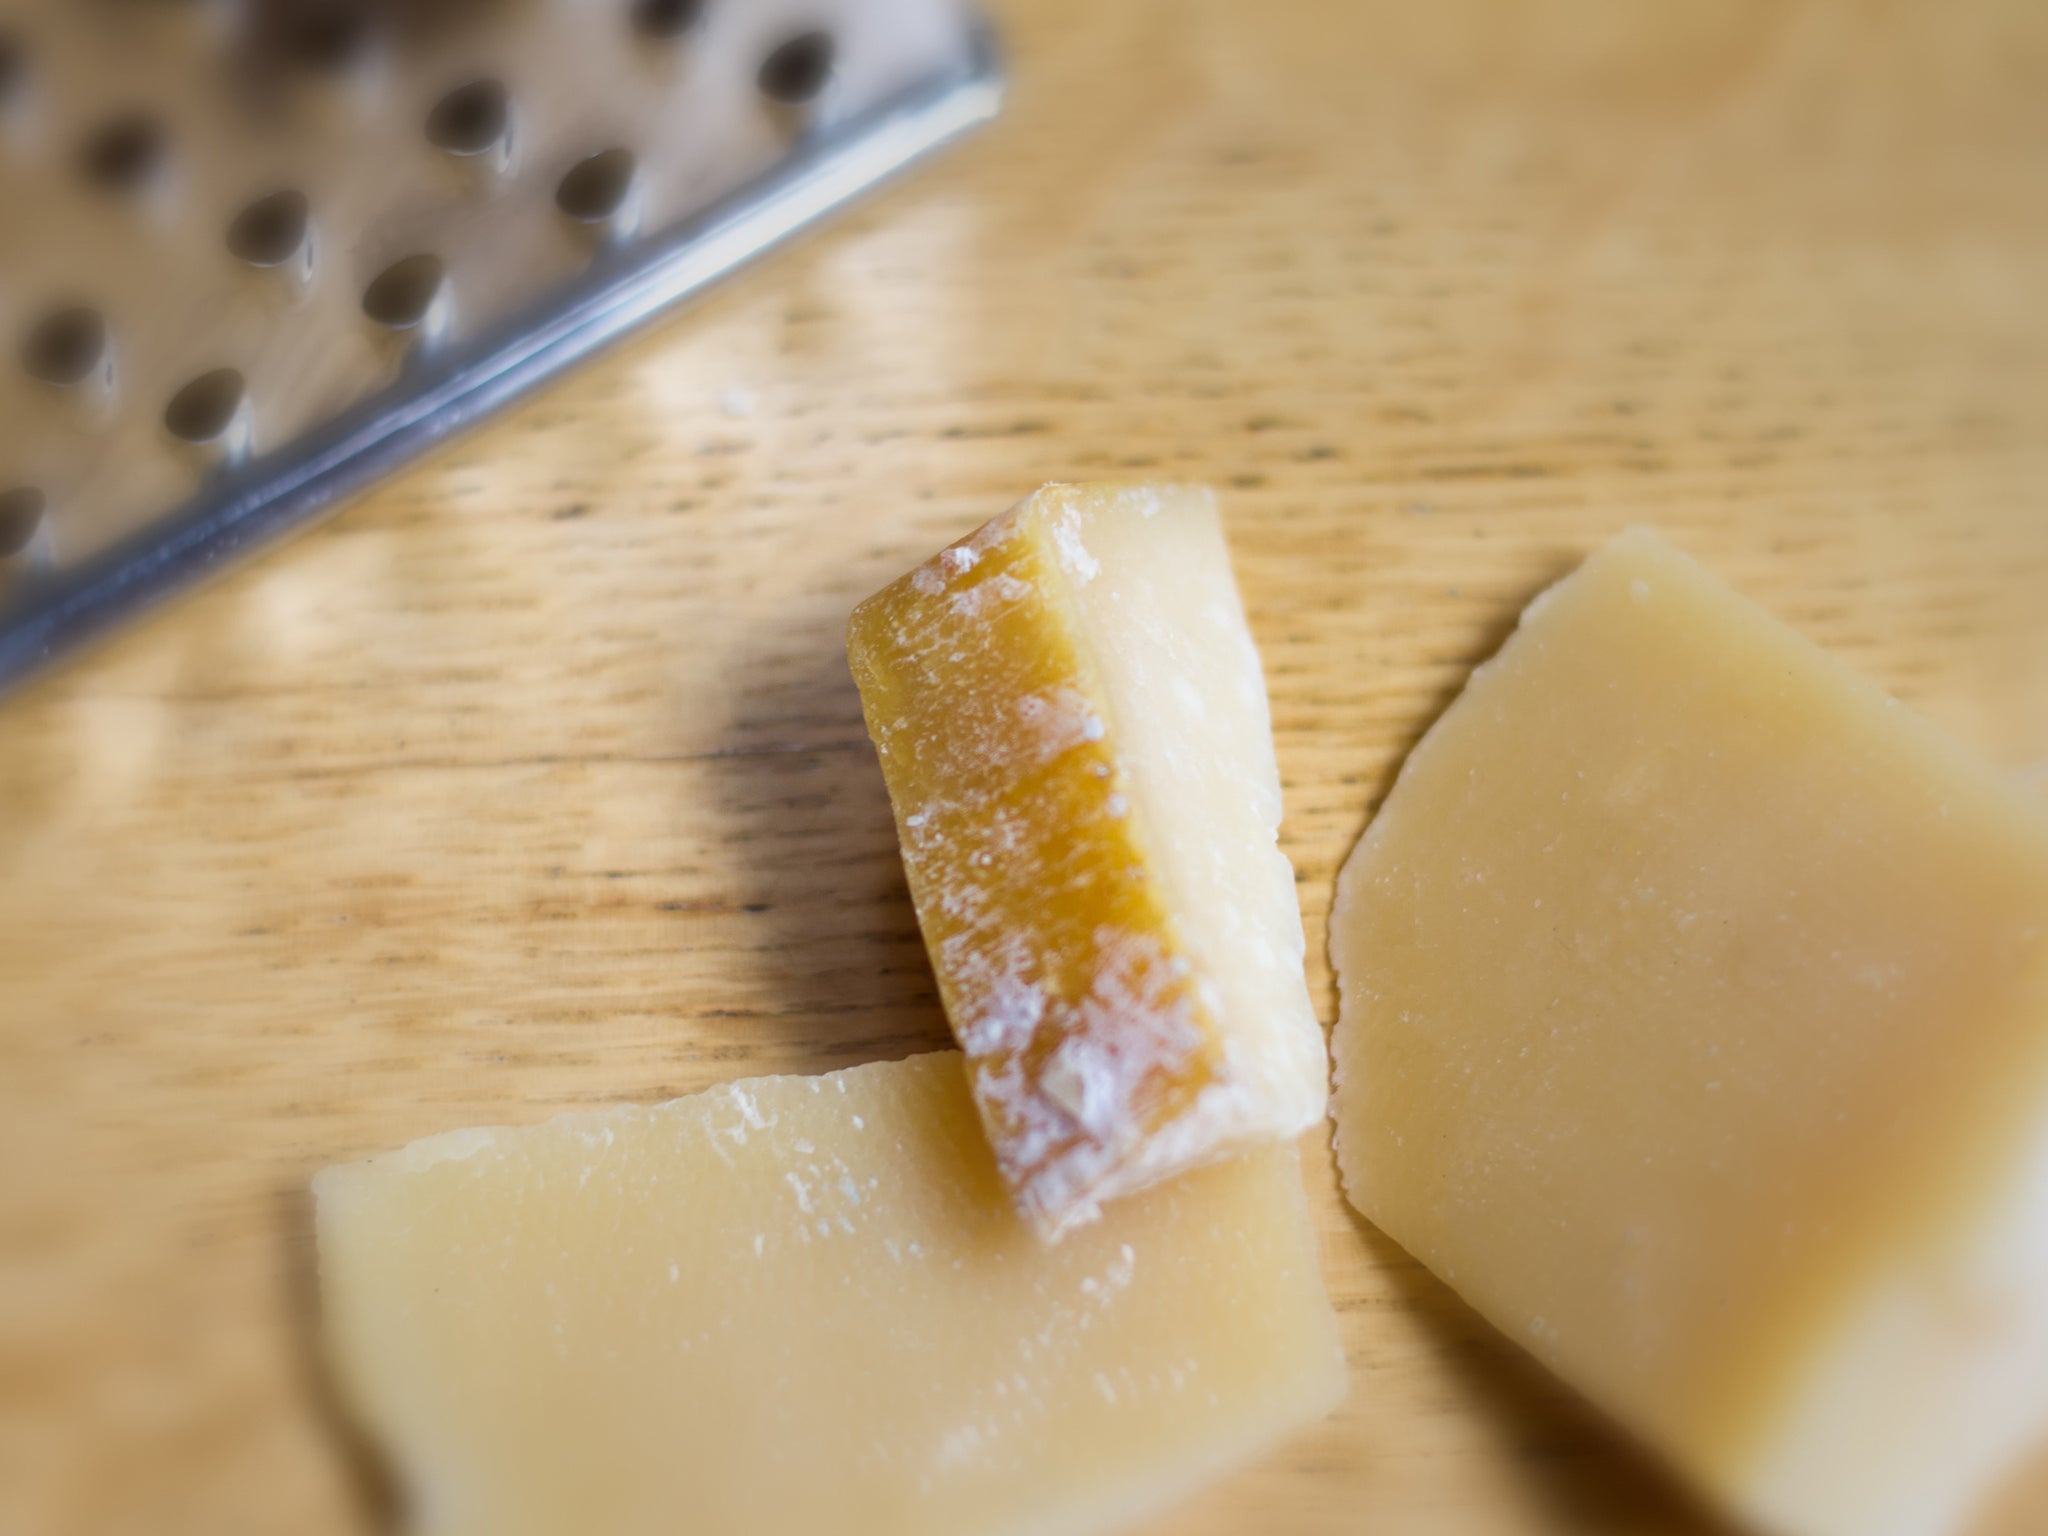 Melt parmesan rinds on top of your next bowl of soup